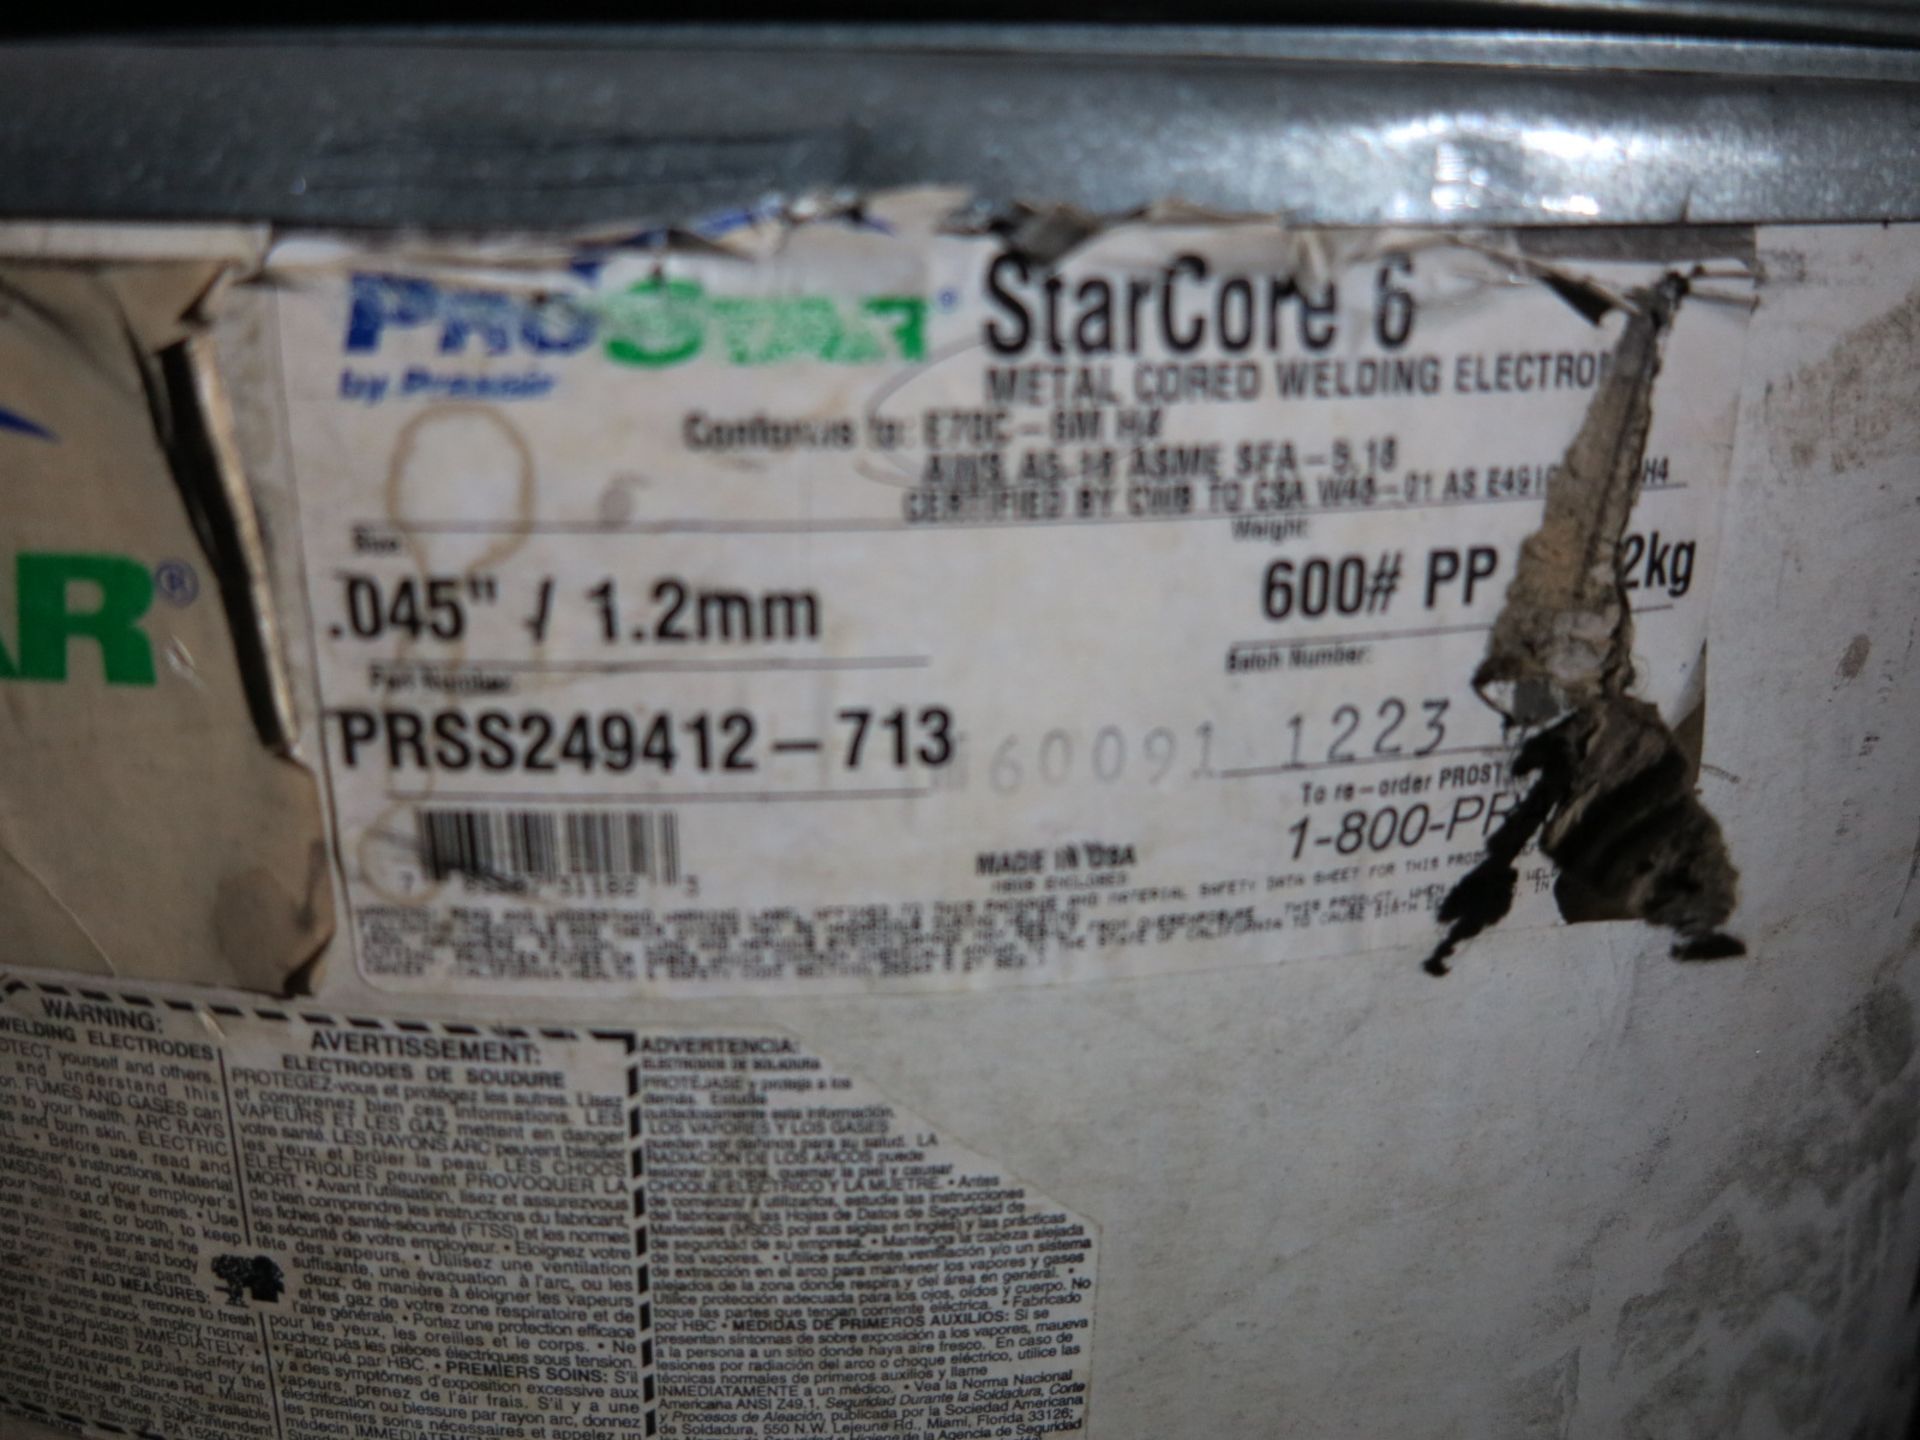 DRUM OF PROSTAR STARCORE6, METAL CORED WELDING WIRE, .045", PART NO. PRSS249412-73 - Image 2 of 2